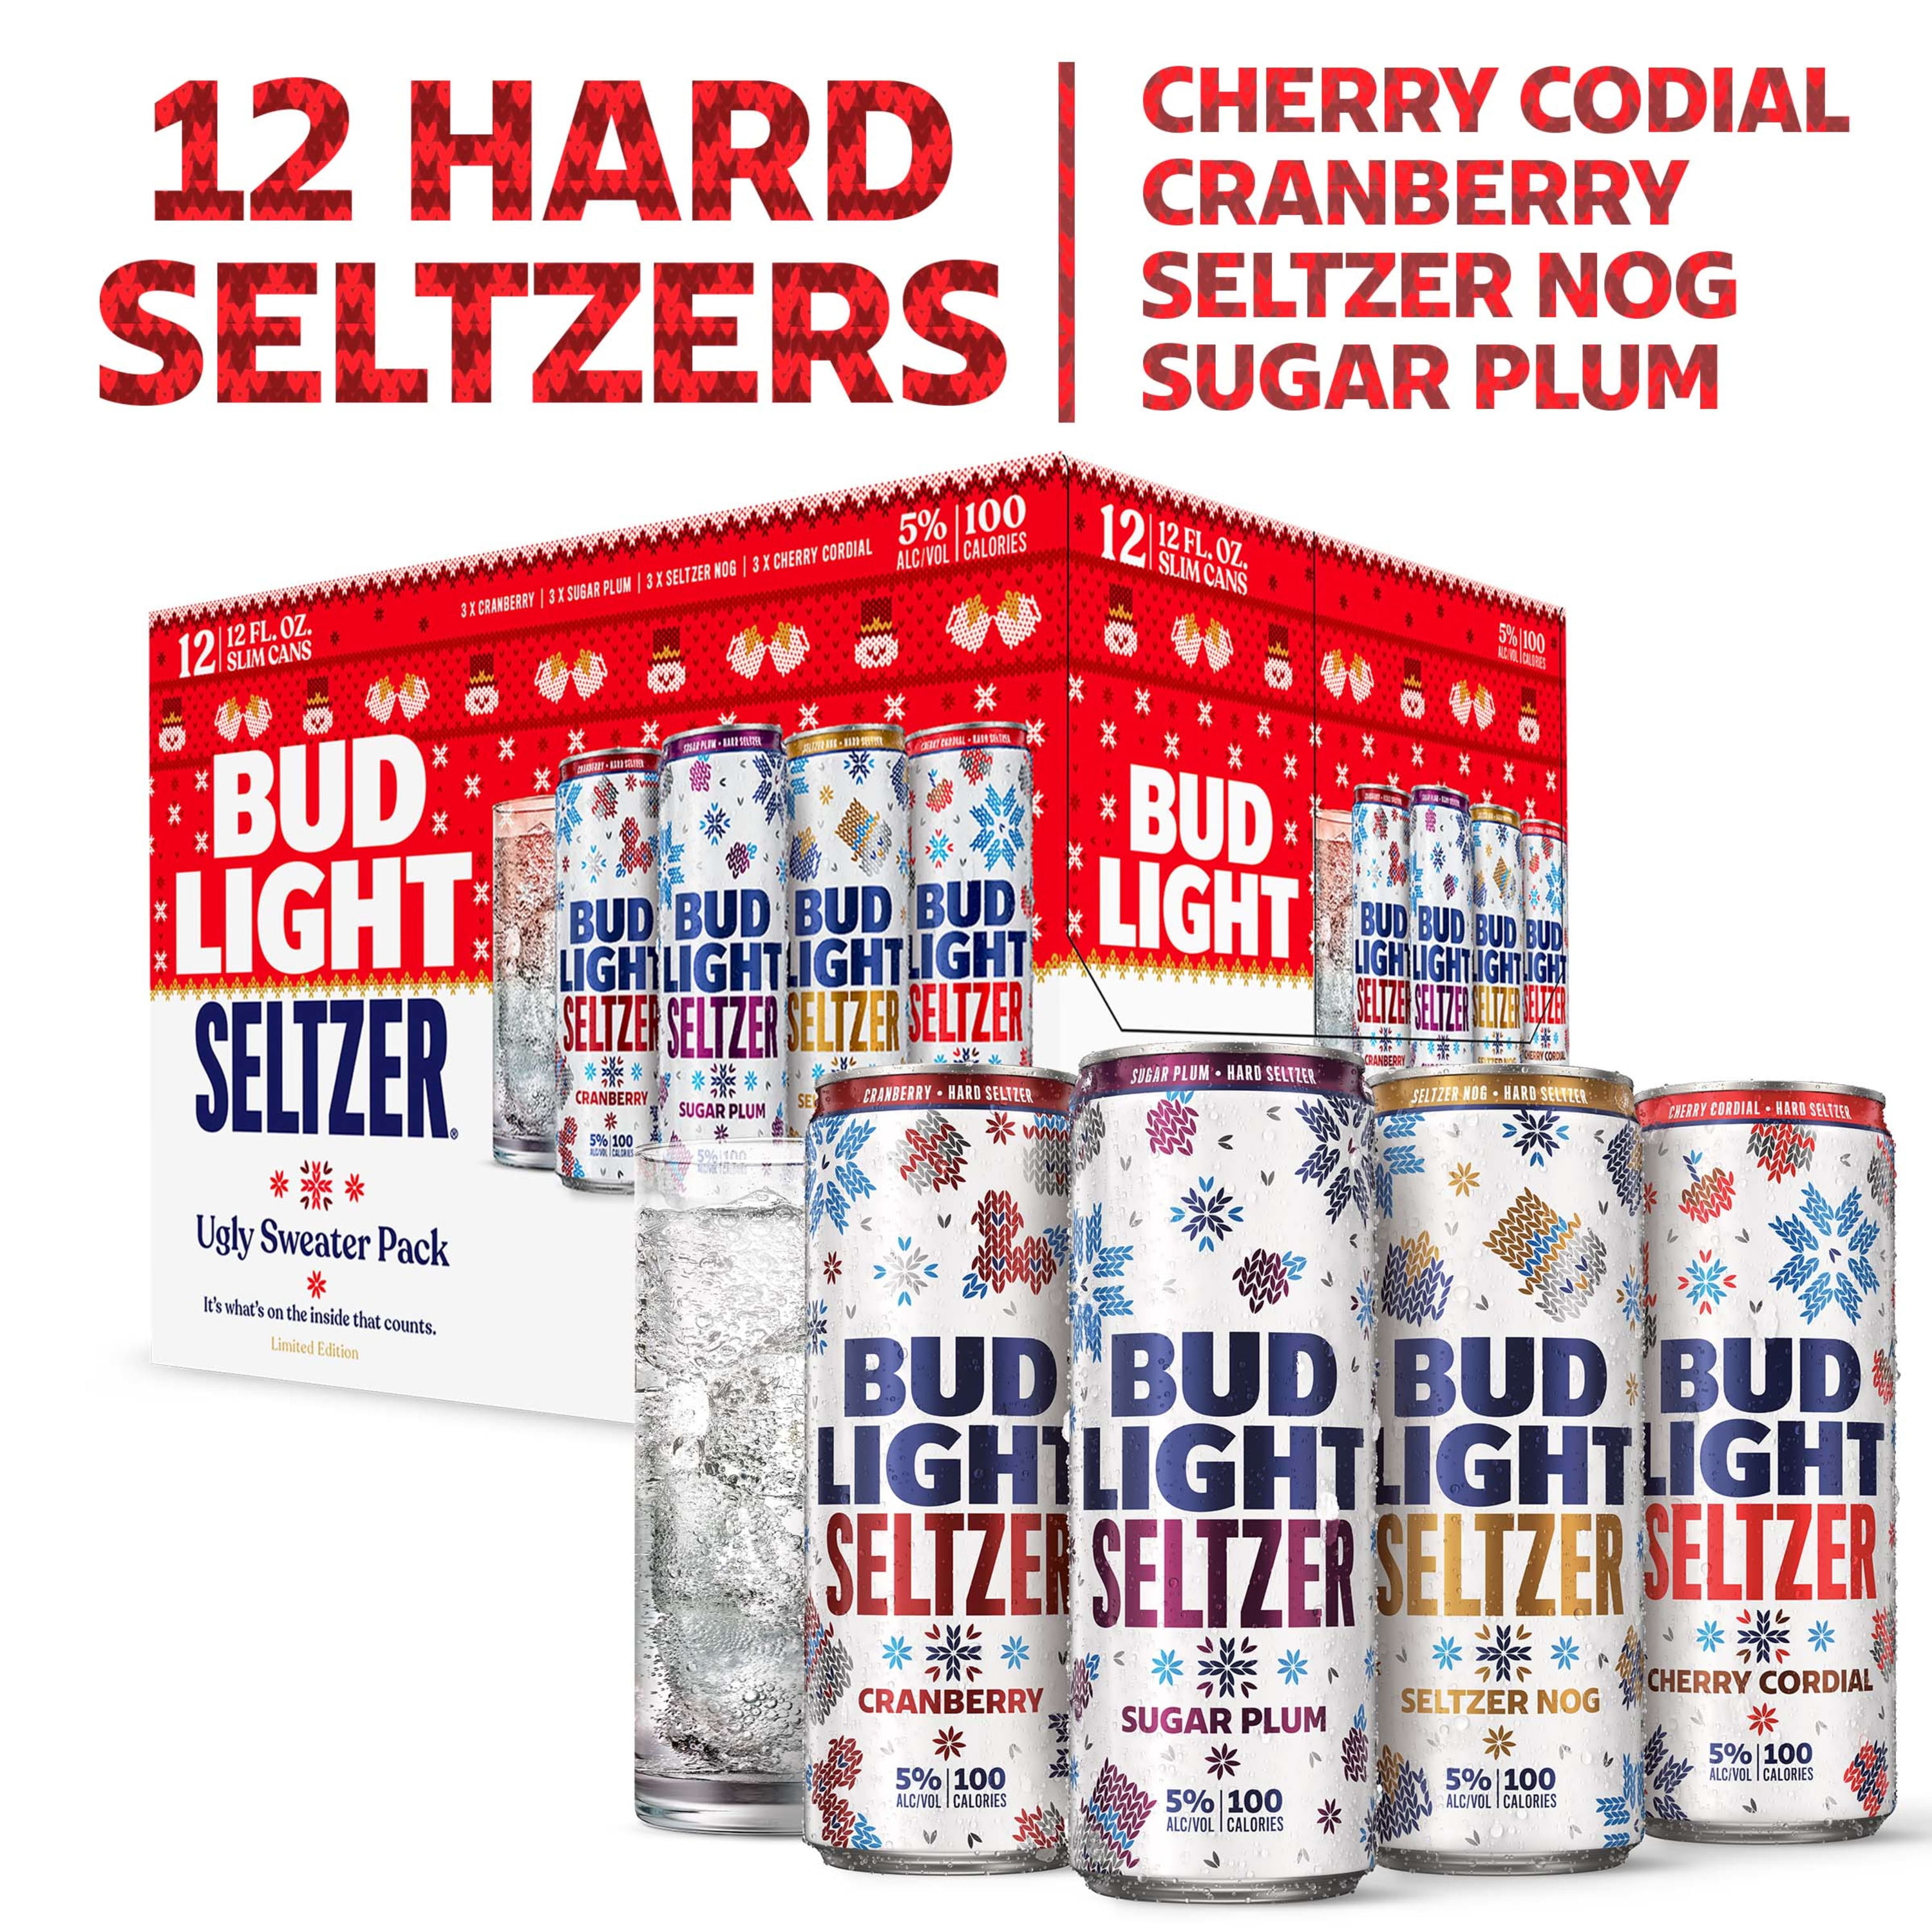 Bud Light Seltzer Ugly Sweater Hard Seltzer Winter Seasonal Variety Pack Limited Edition, 12 Pack 12 fl. oz. Cans